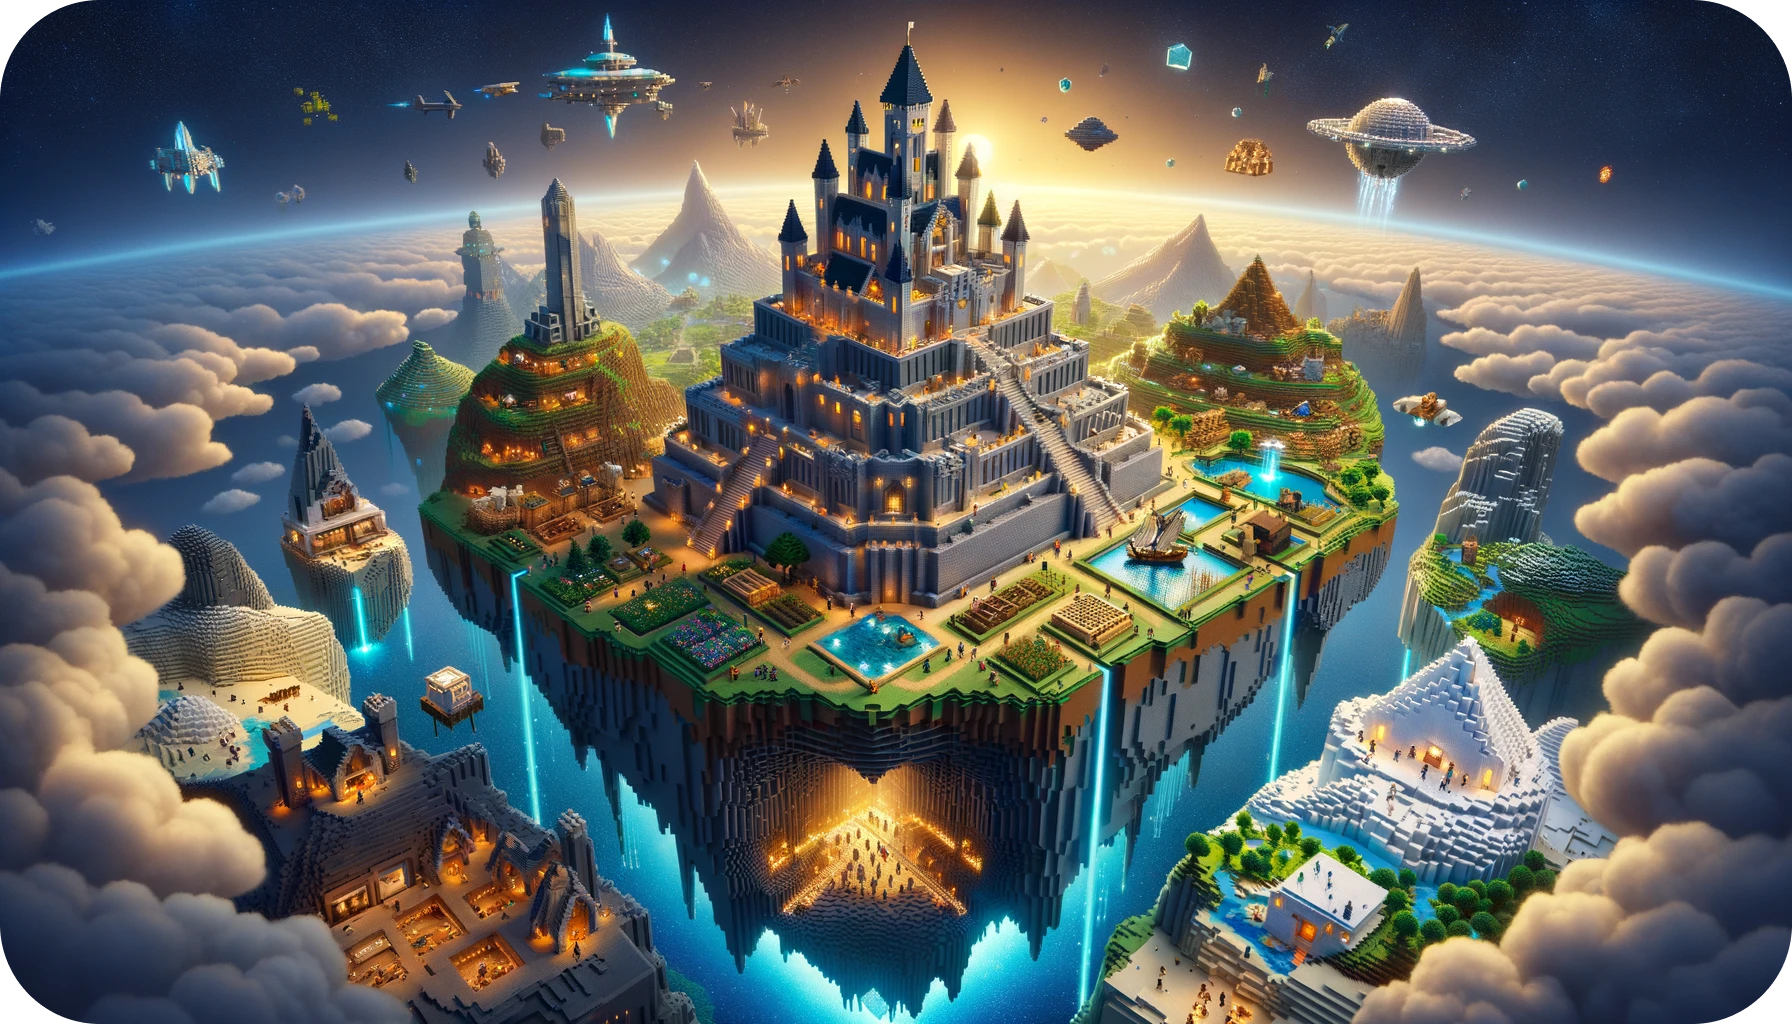 A scene featuring a grand castle on a floating island, with various biomes below and a network of glowing caves symbolizing exploration.